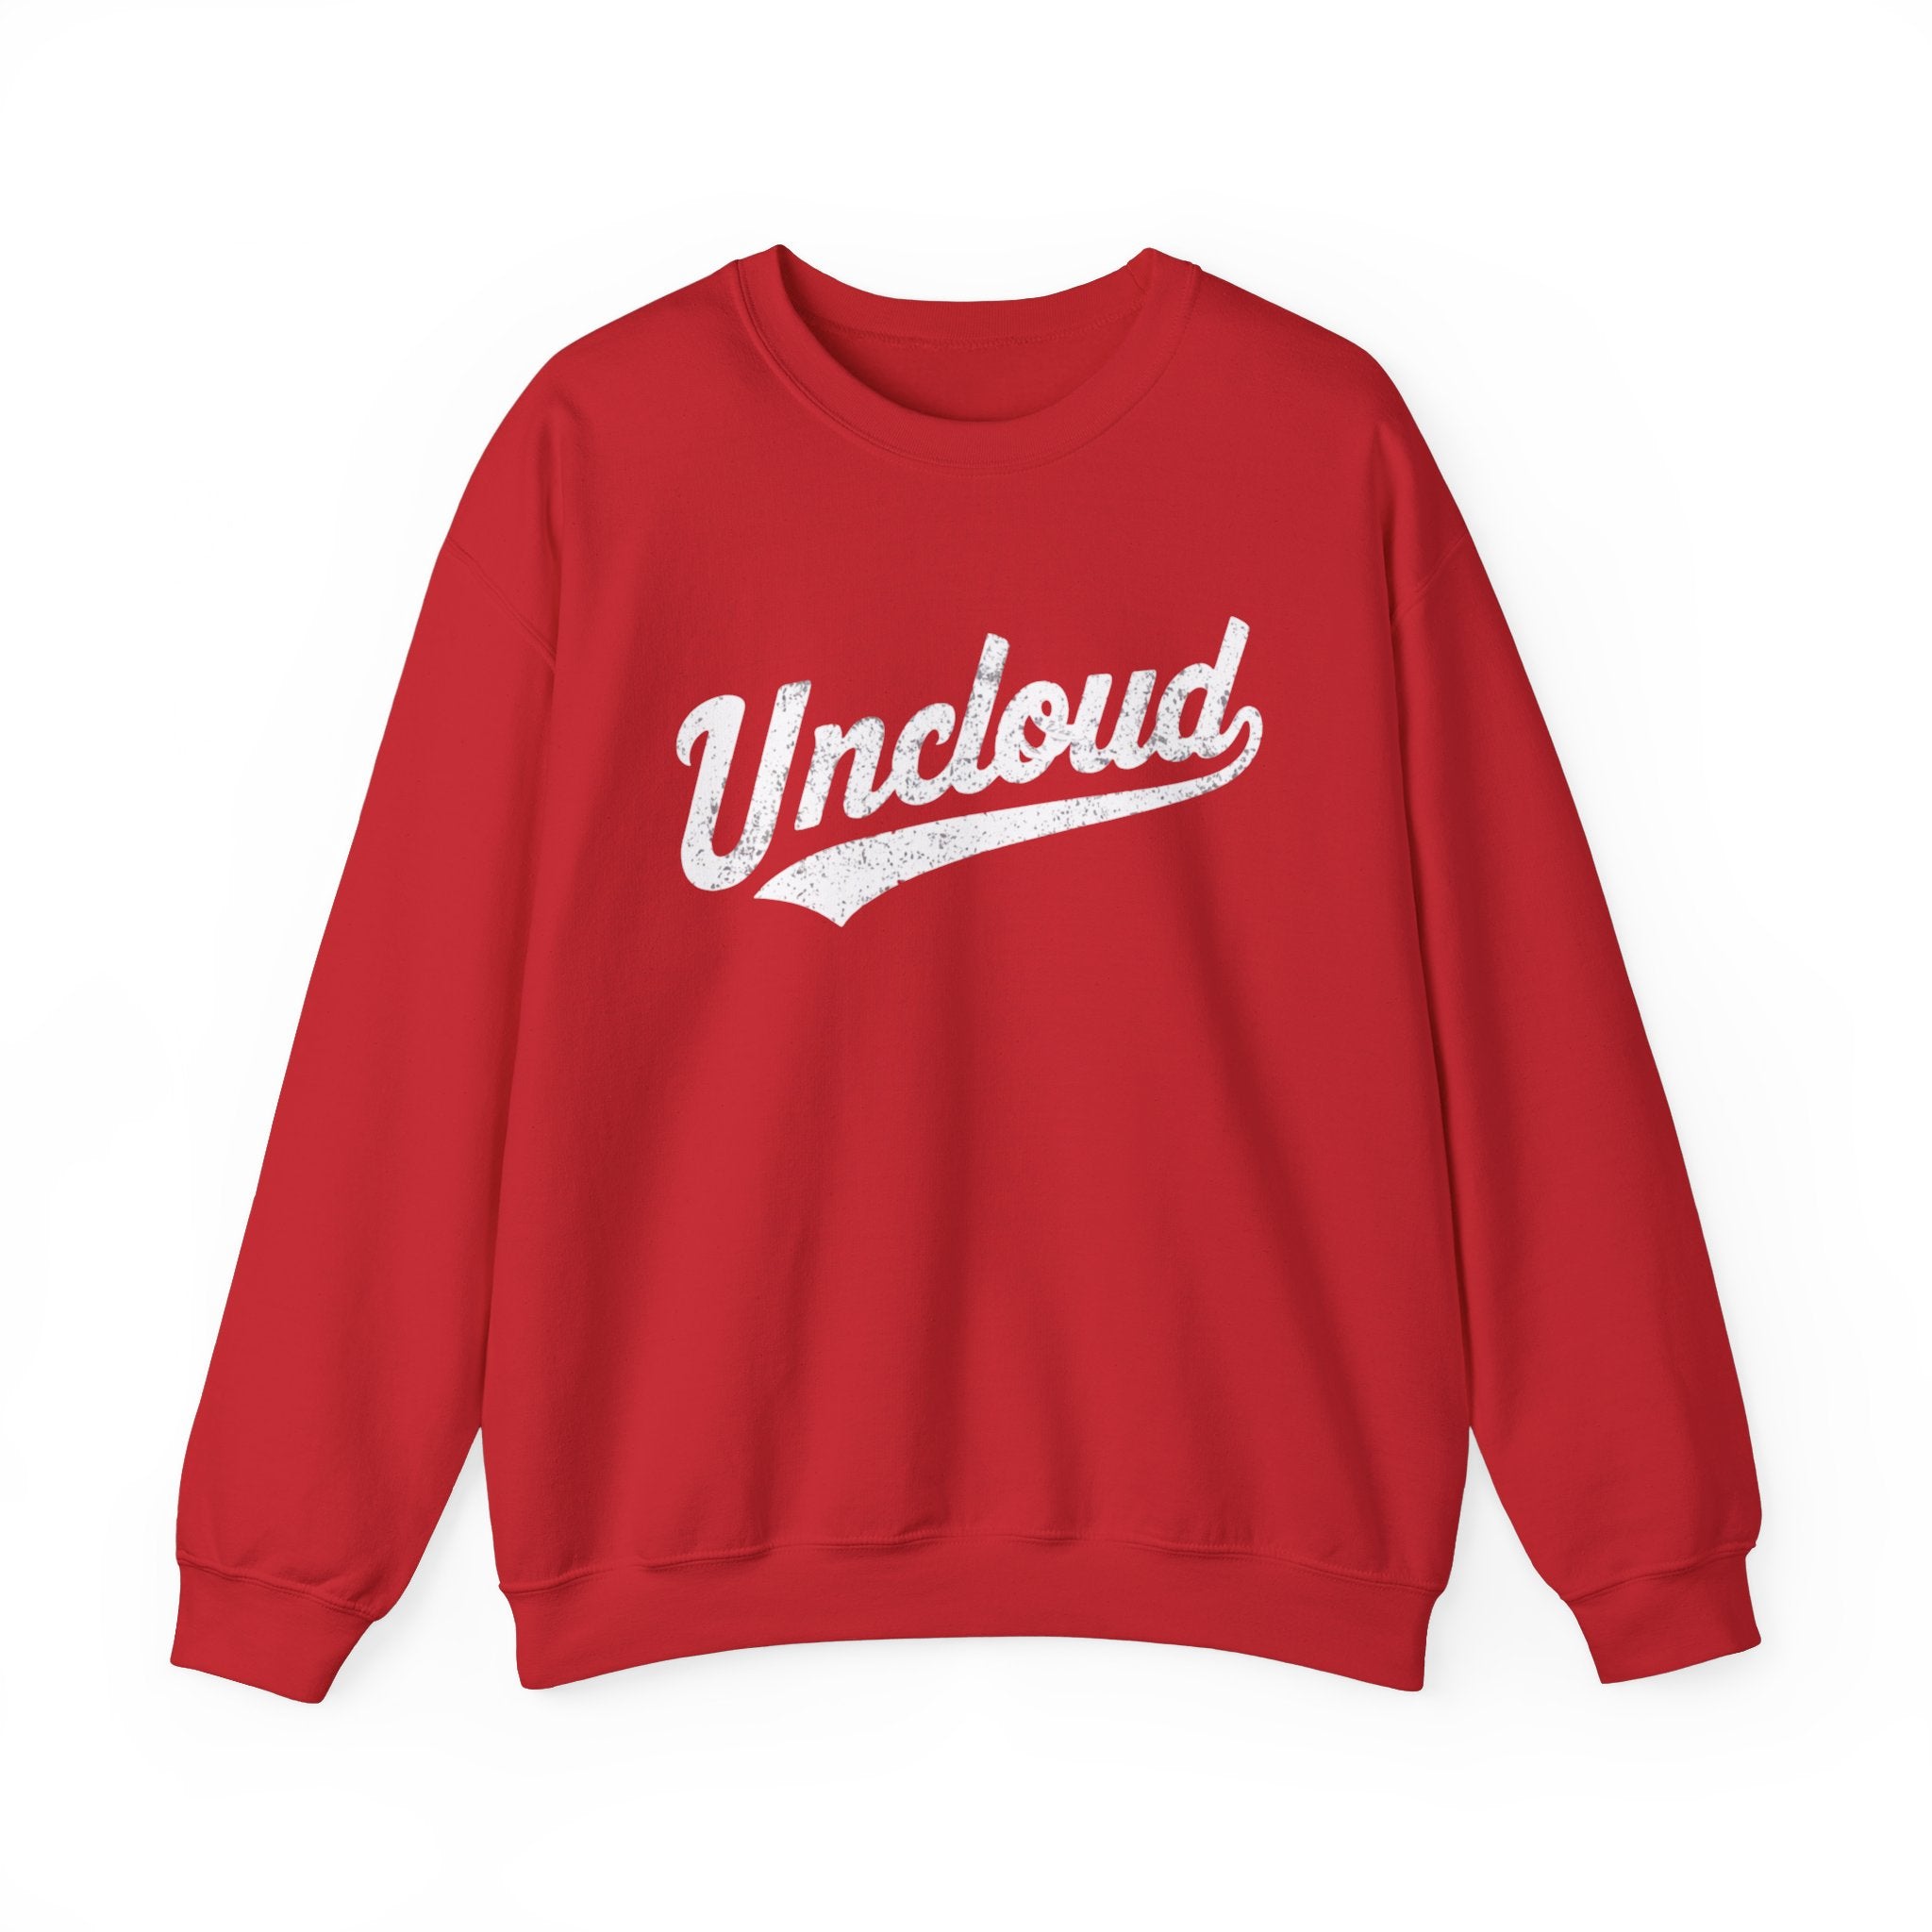 A cozy red Uncloud - Sweatshirt with the word "Uncloud" printed in white, stylized script across the chest, making it a warm essential for any wardrobe.